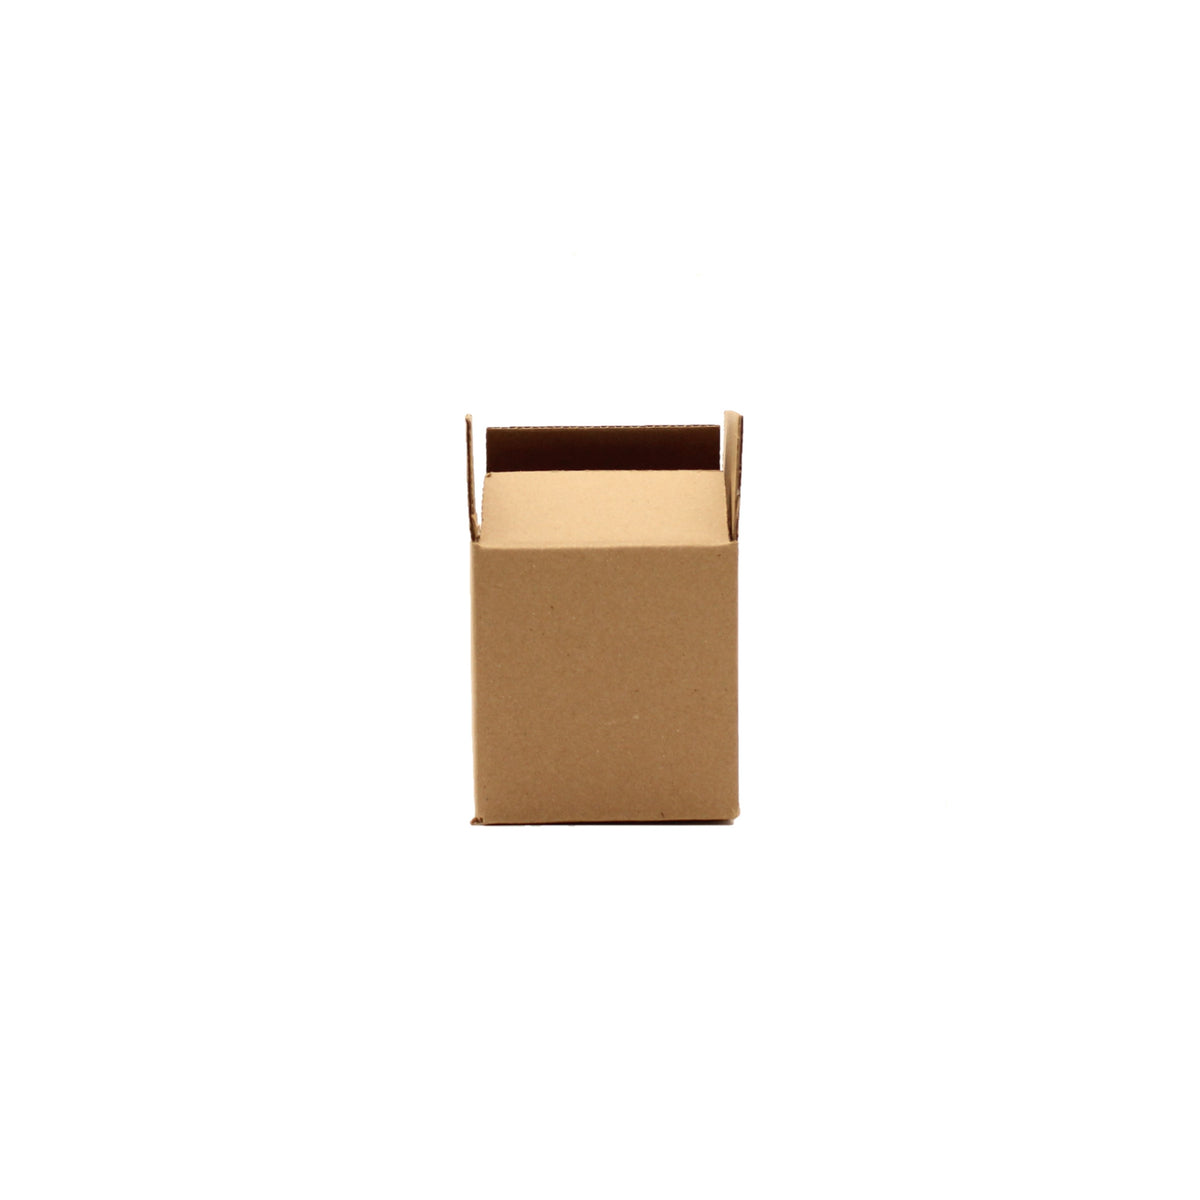 Shipping Boxes / Corrugated Boxes | EcomPack.ca - EcomPack.ca